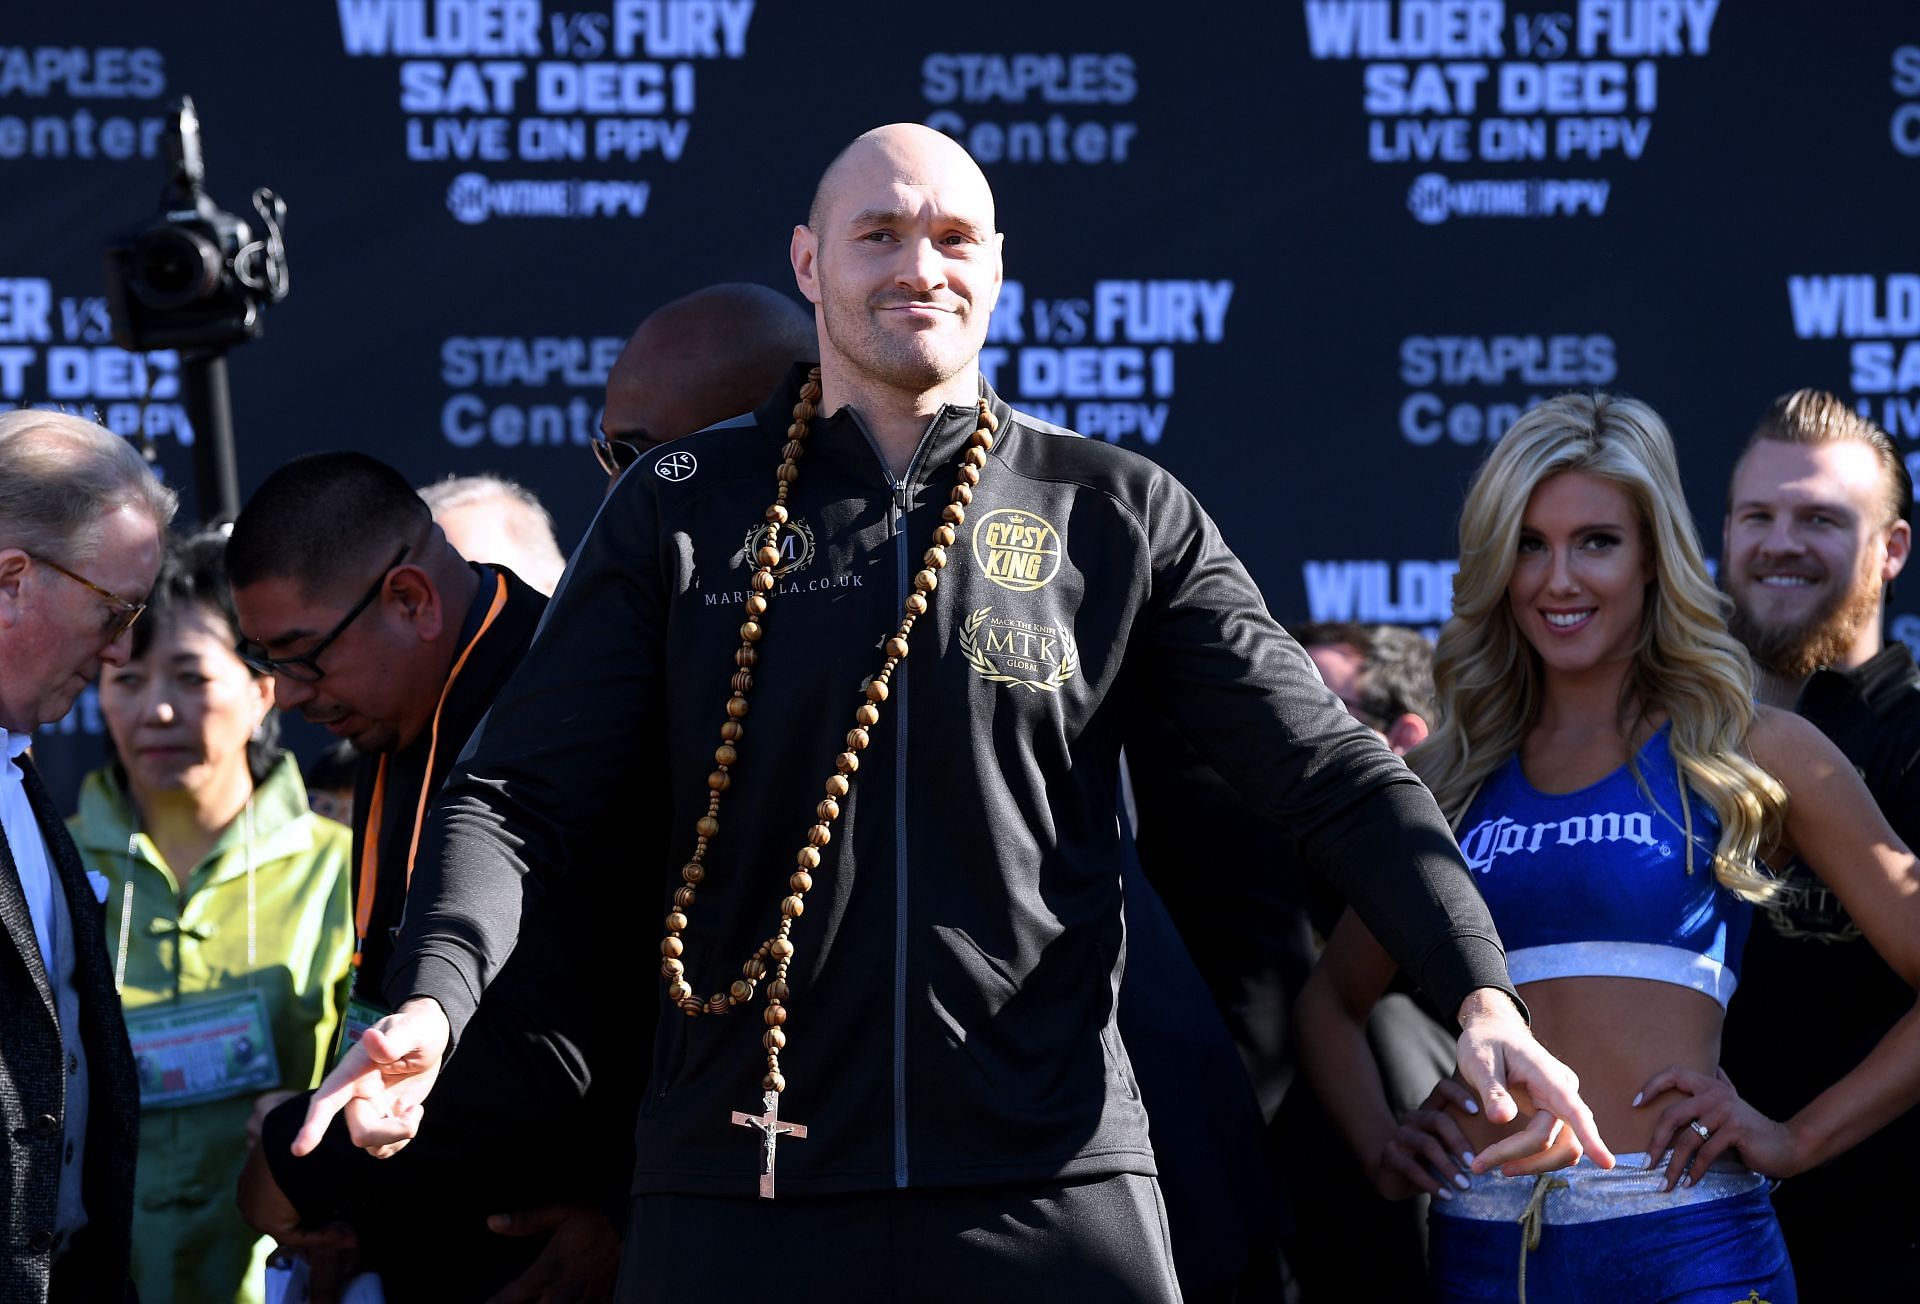 Tyson Fury with the MTK logo on his chest during the Wilder-Fury 1 build-up